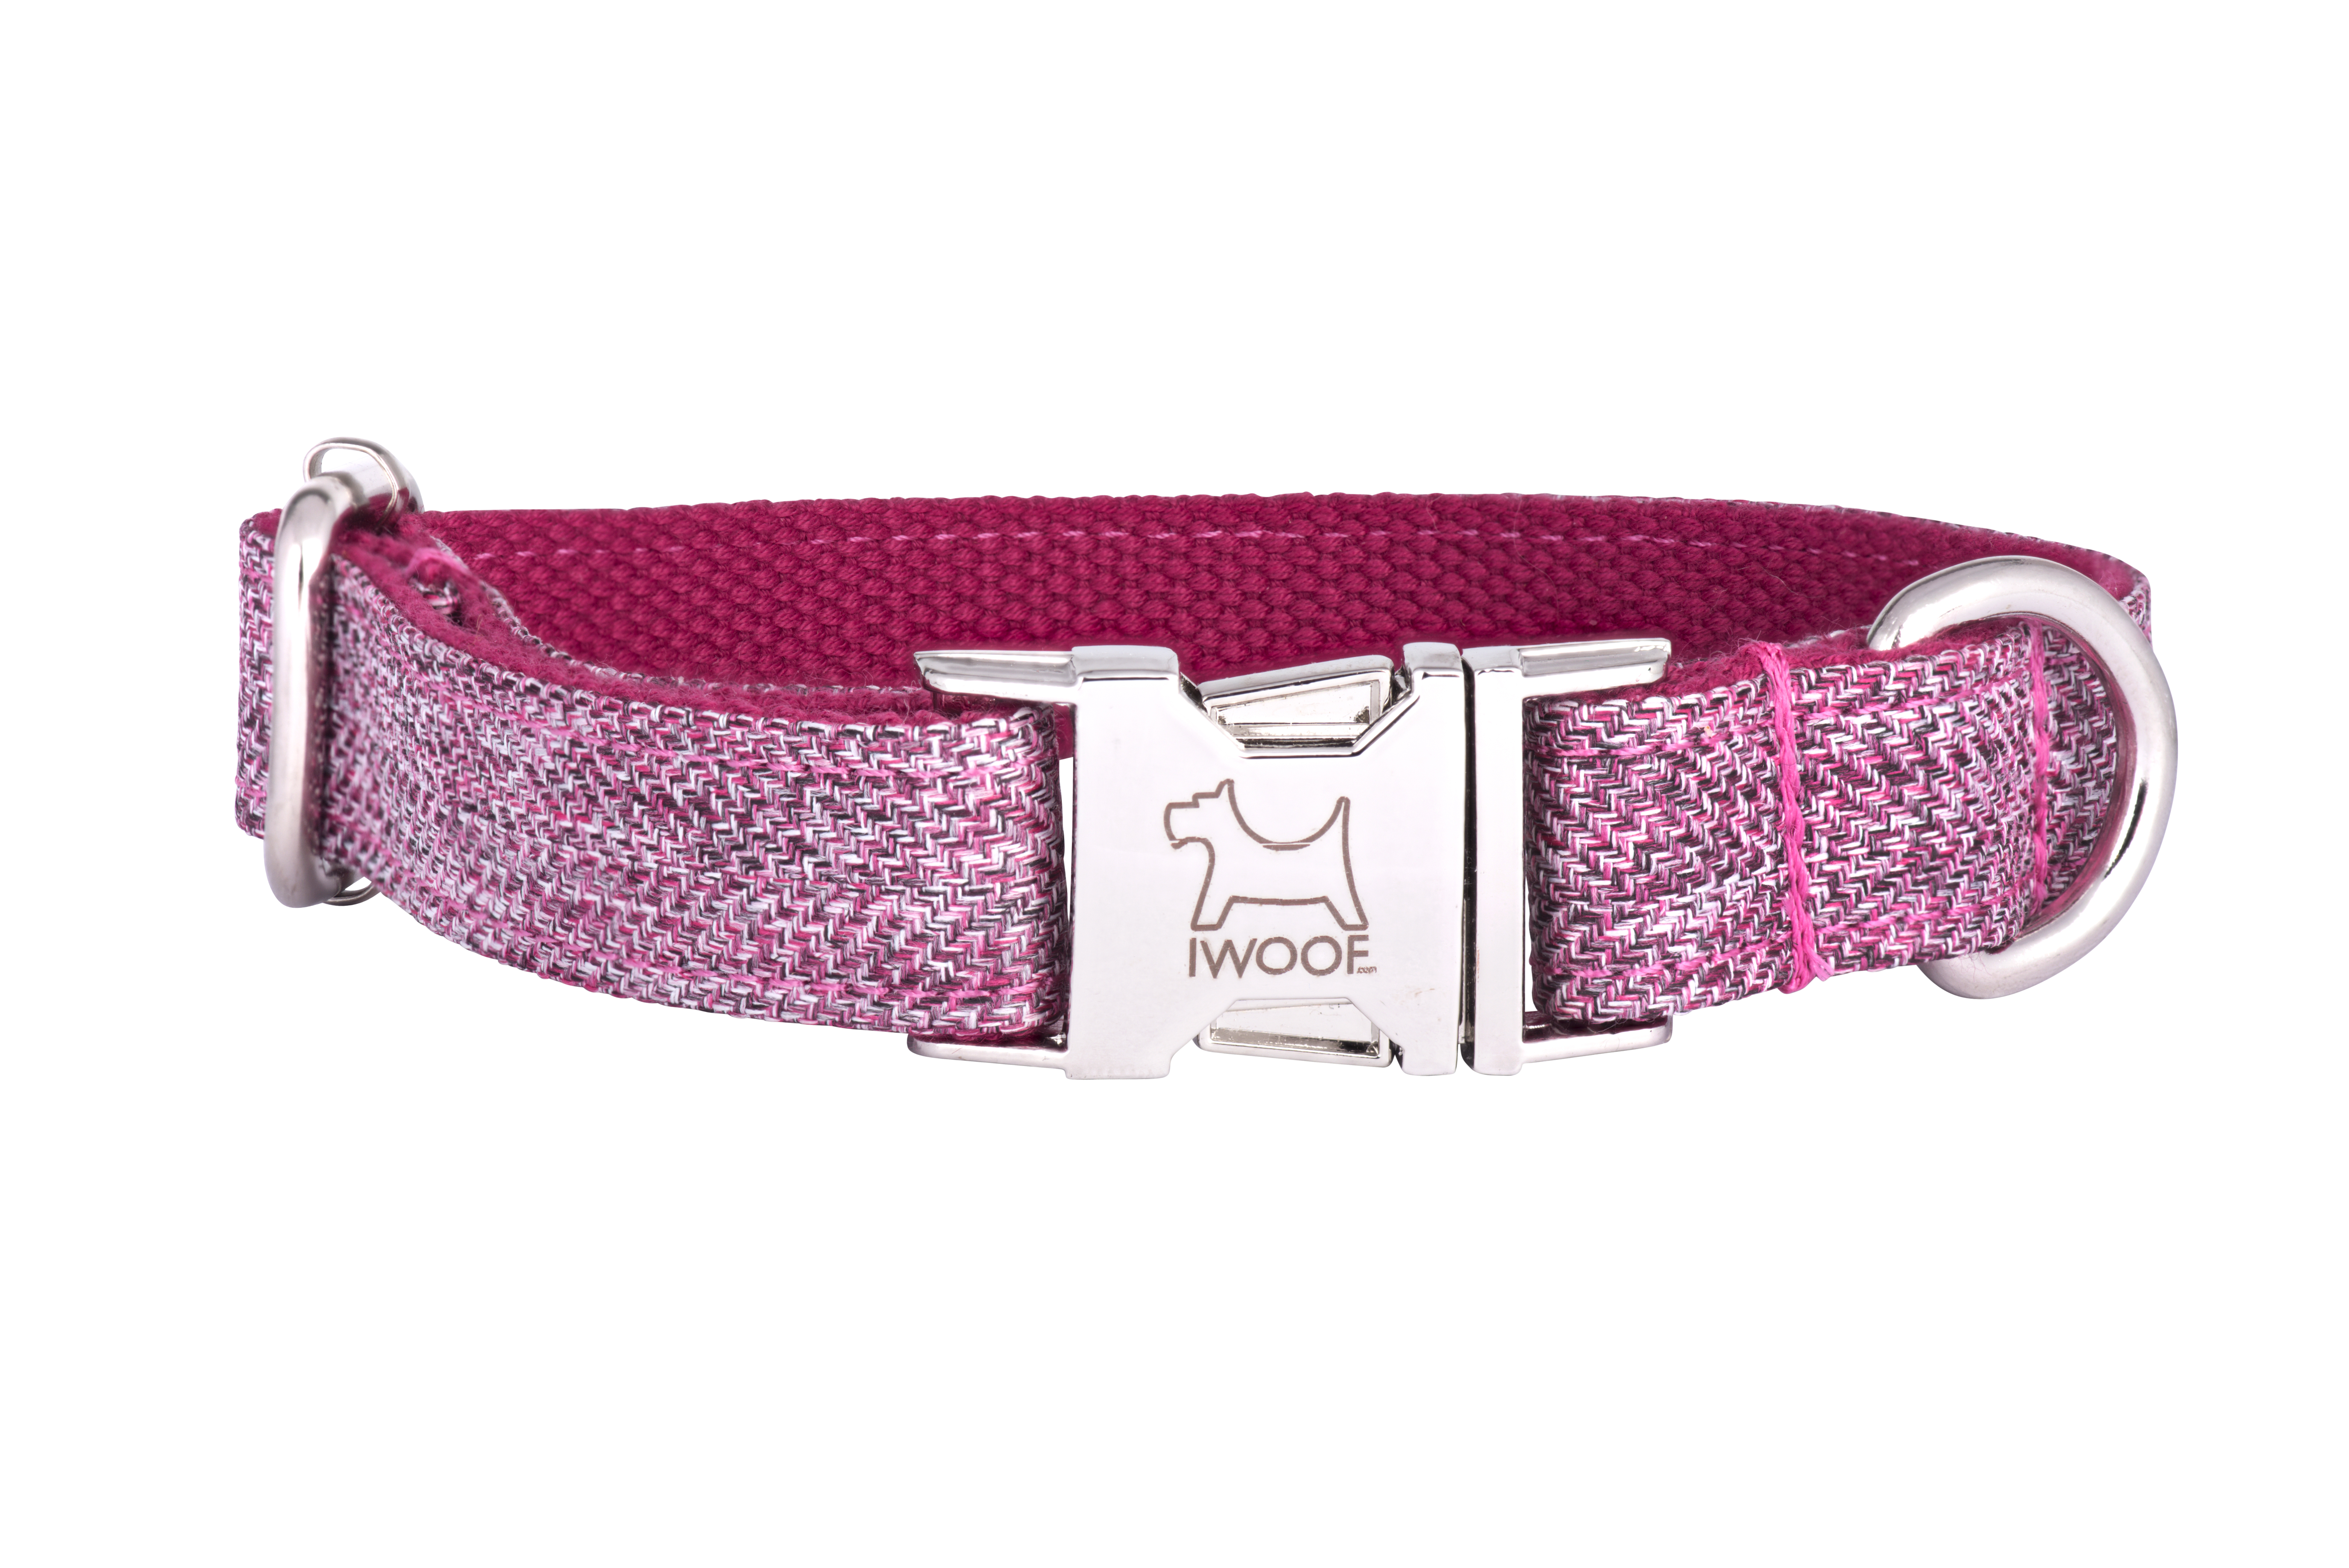 Dog Rose designer dog collar and lead set with silver buckle by IWOOF